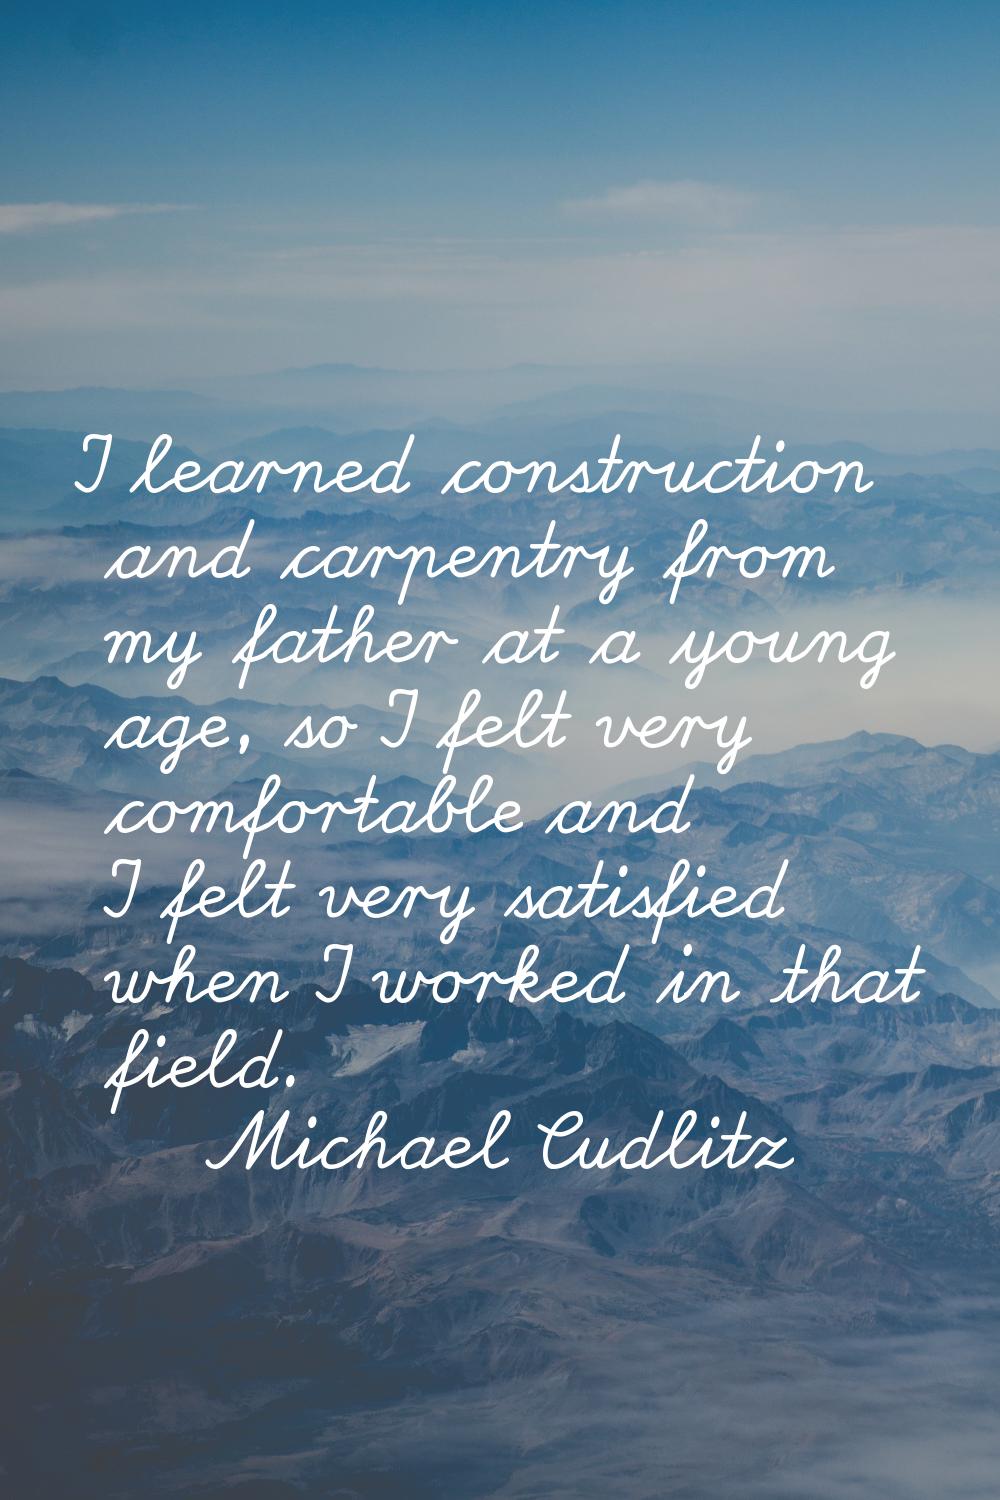 I learned construction and carpentry from my father at a young age, so I felt very comfortable and 